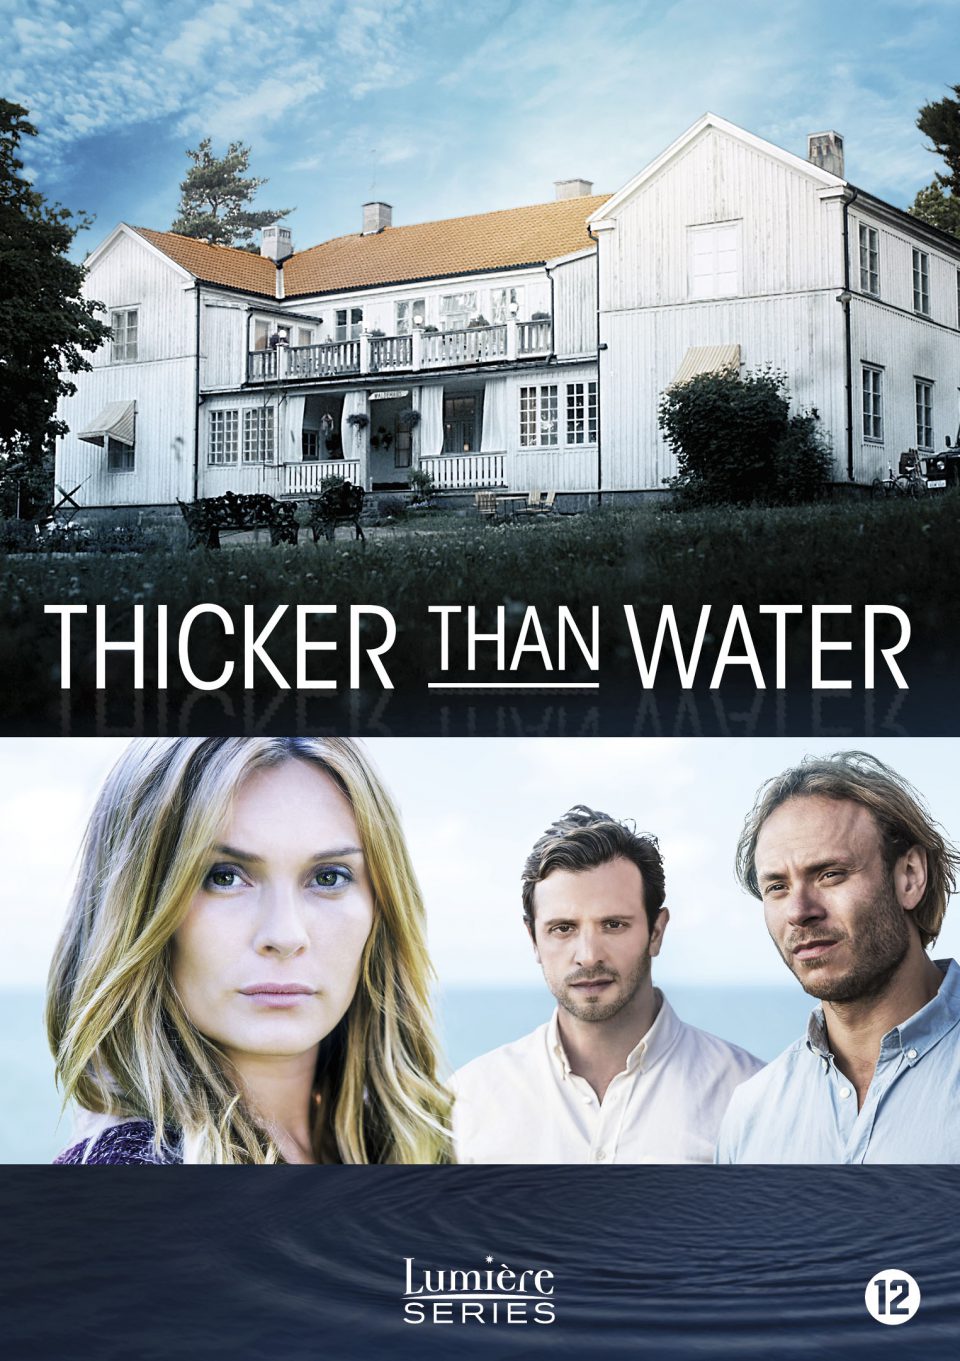 DVD ST THICKER THAN WATER 2D